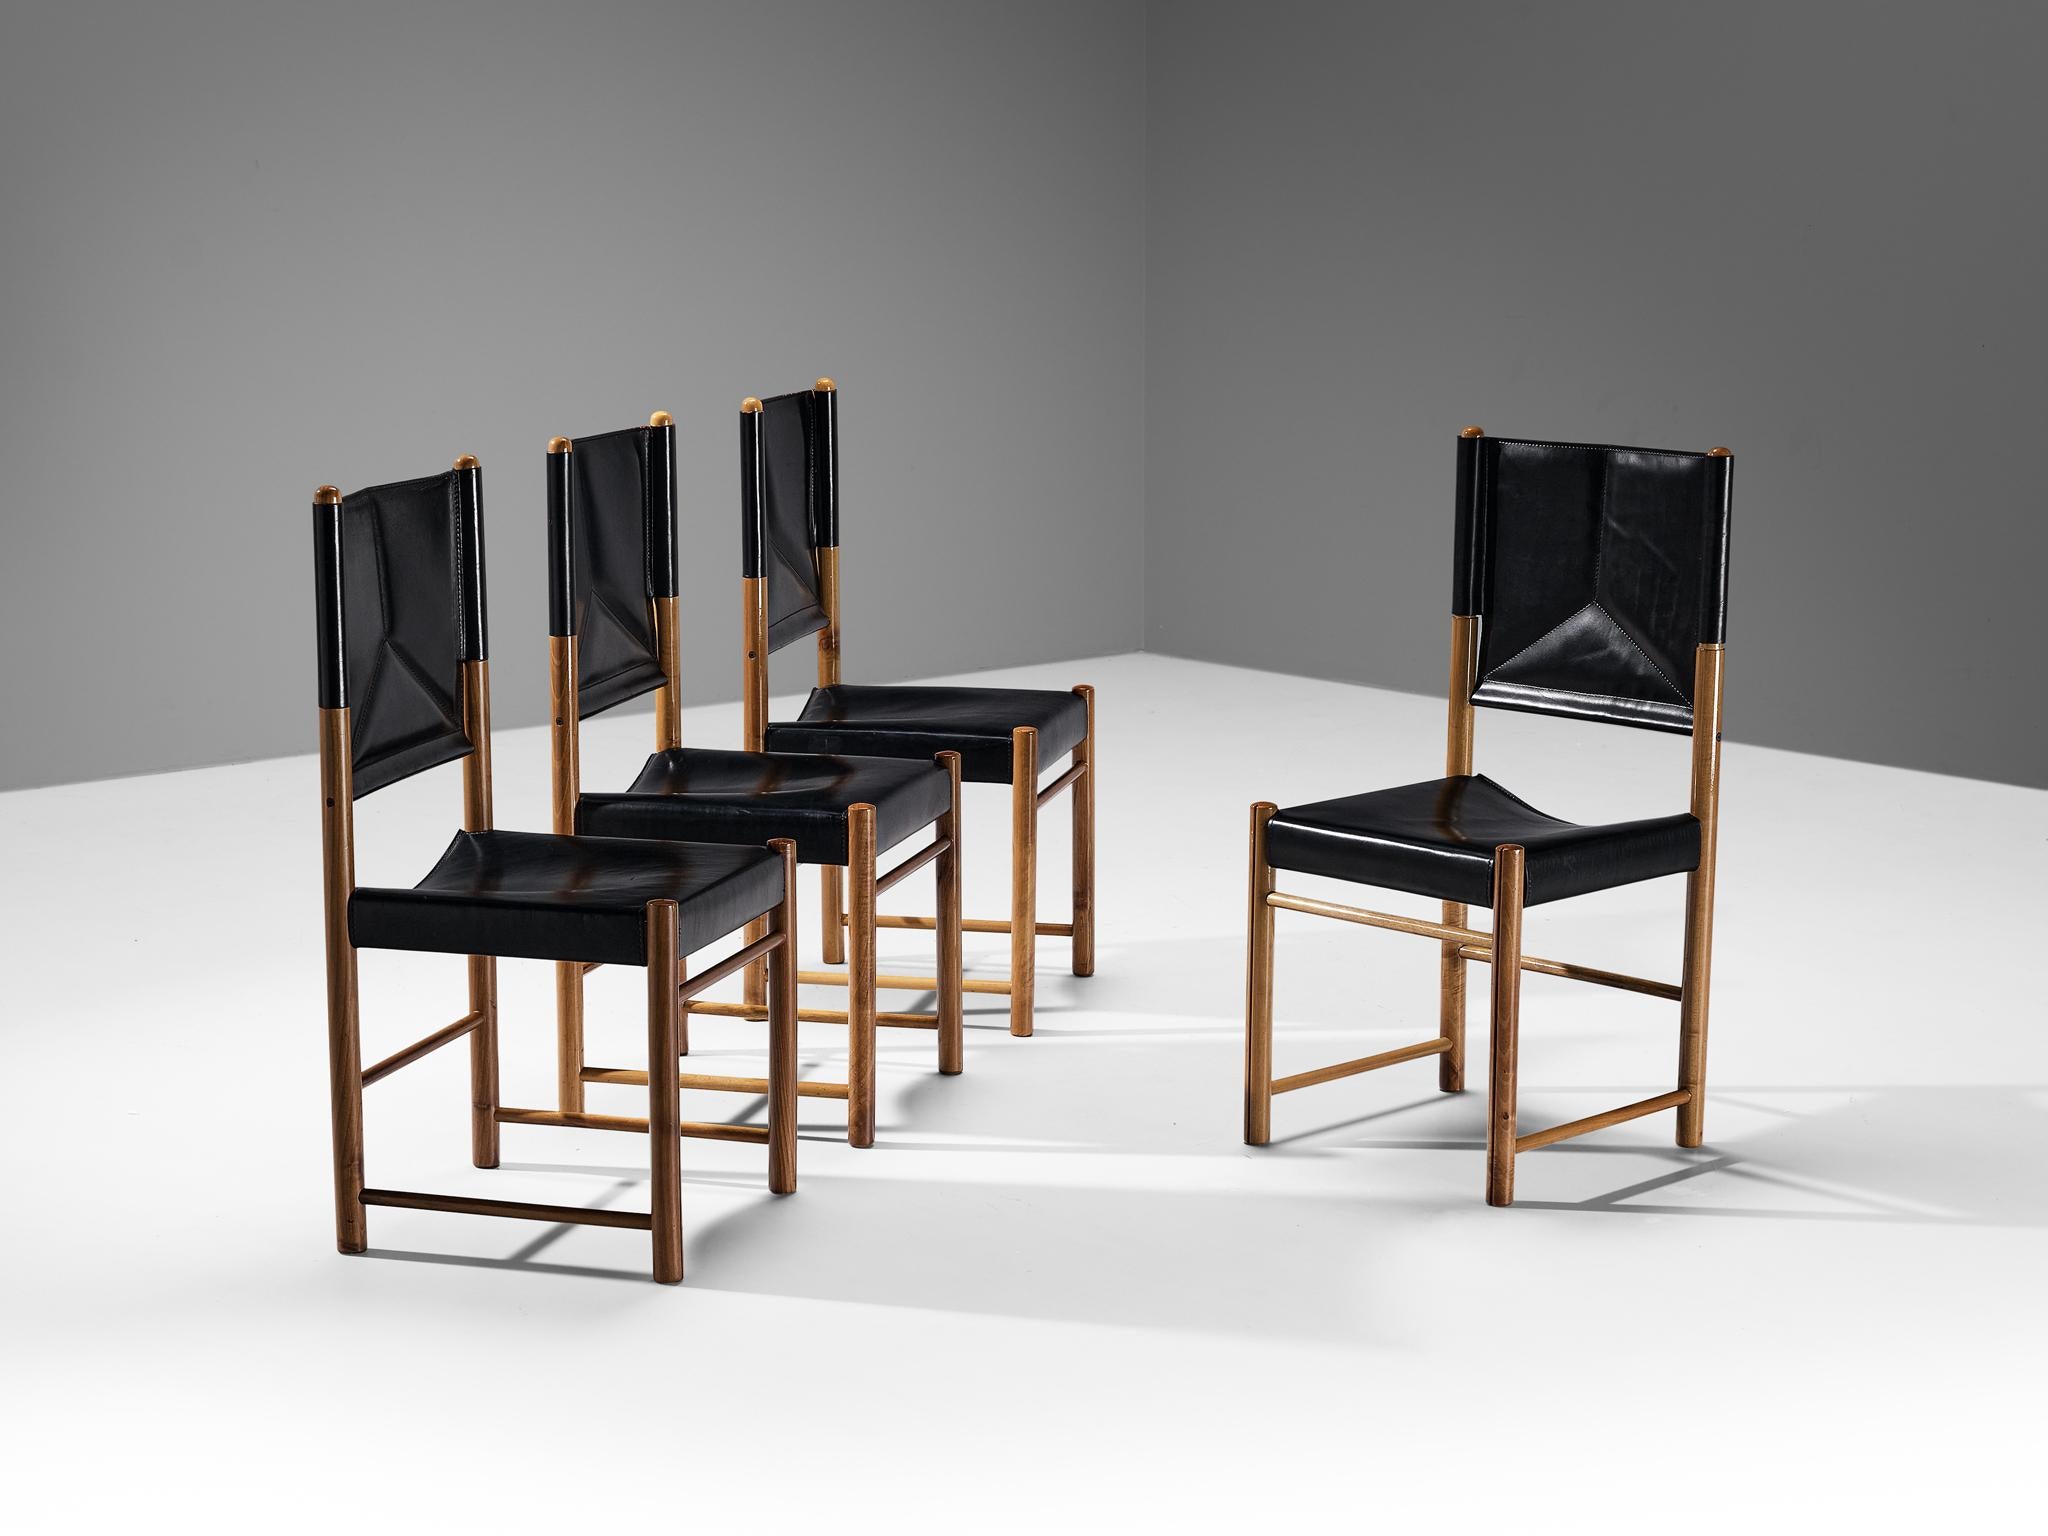 Set of four dining chairs, walnut, leather, Italy, 1970s

A delicate set of chairs that are well-proportioned and will elevate one's dining area in a vigorous and strong way. The wooden frame is composed of cylindrical beams to which the black